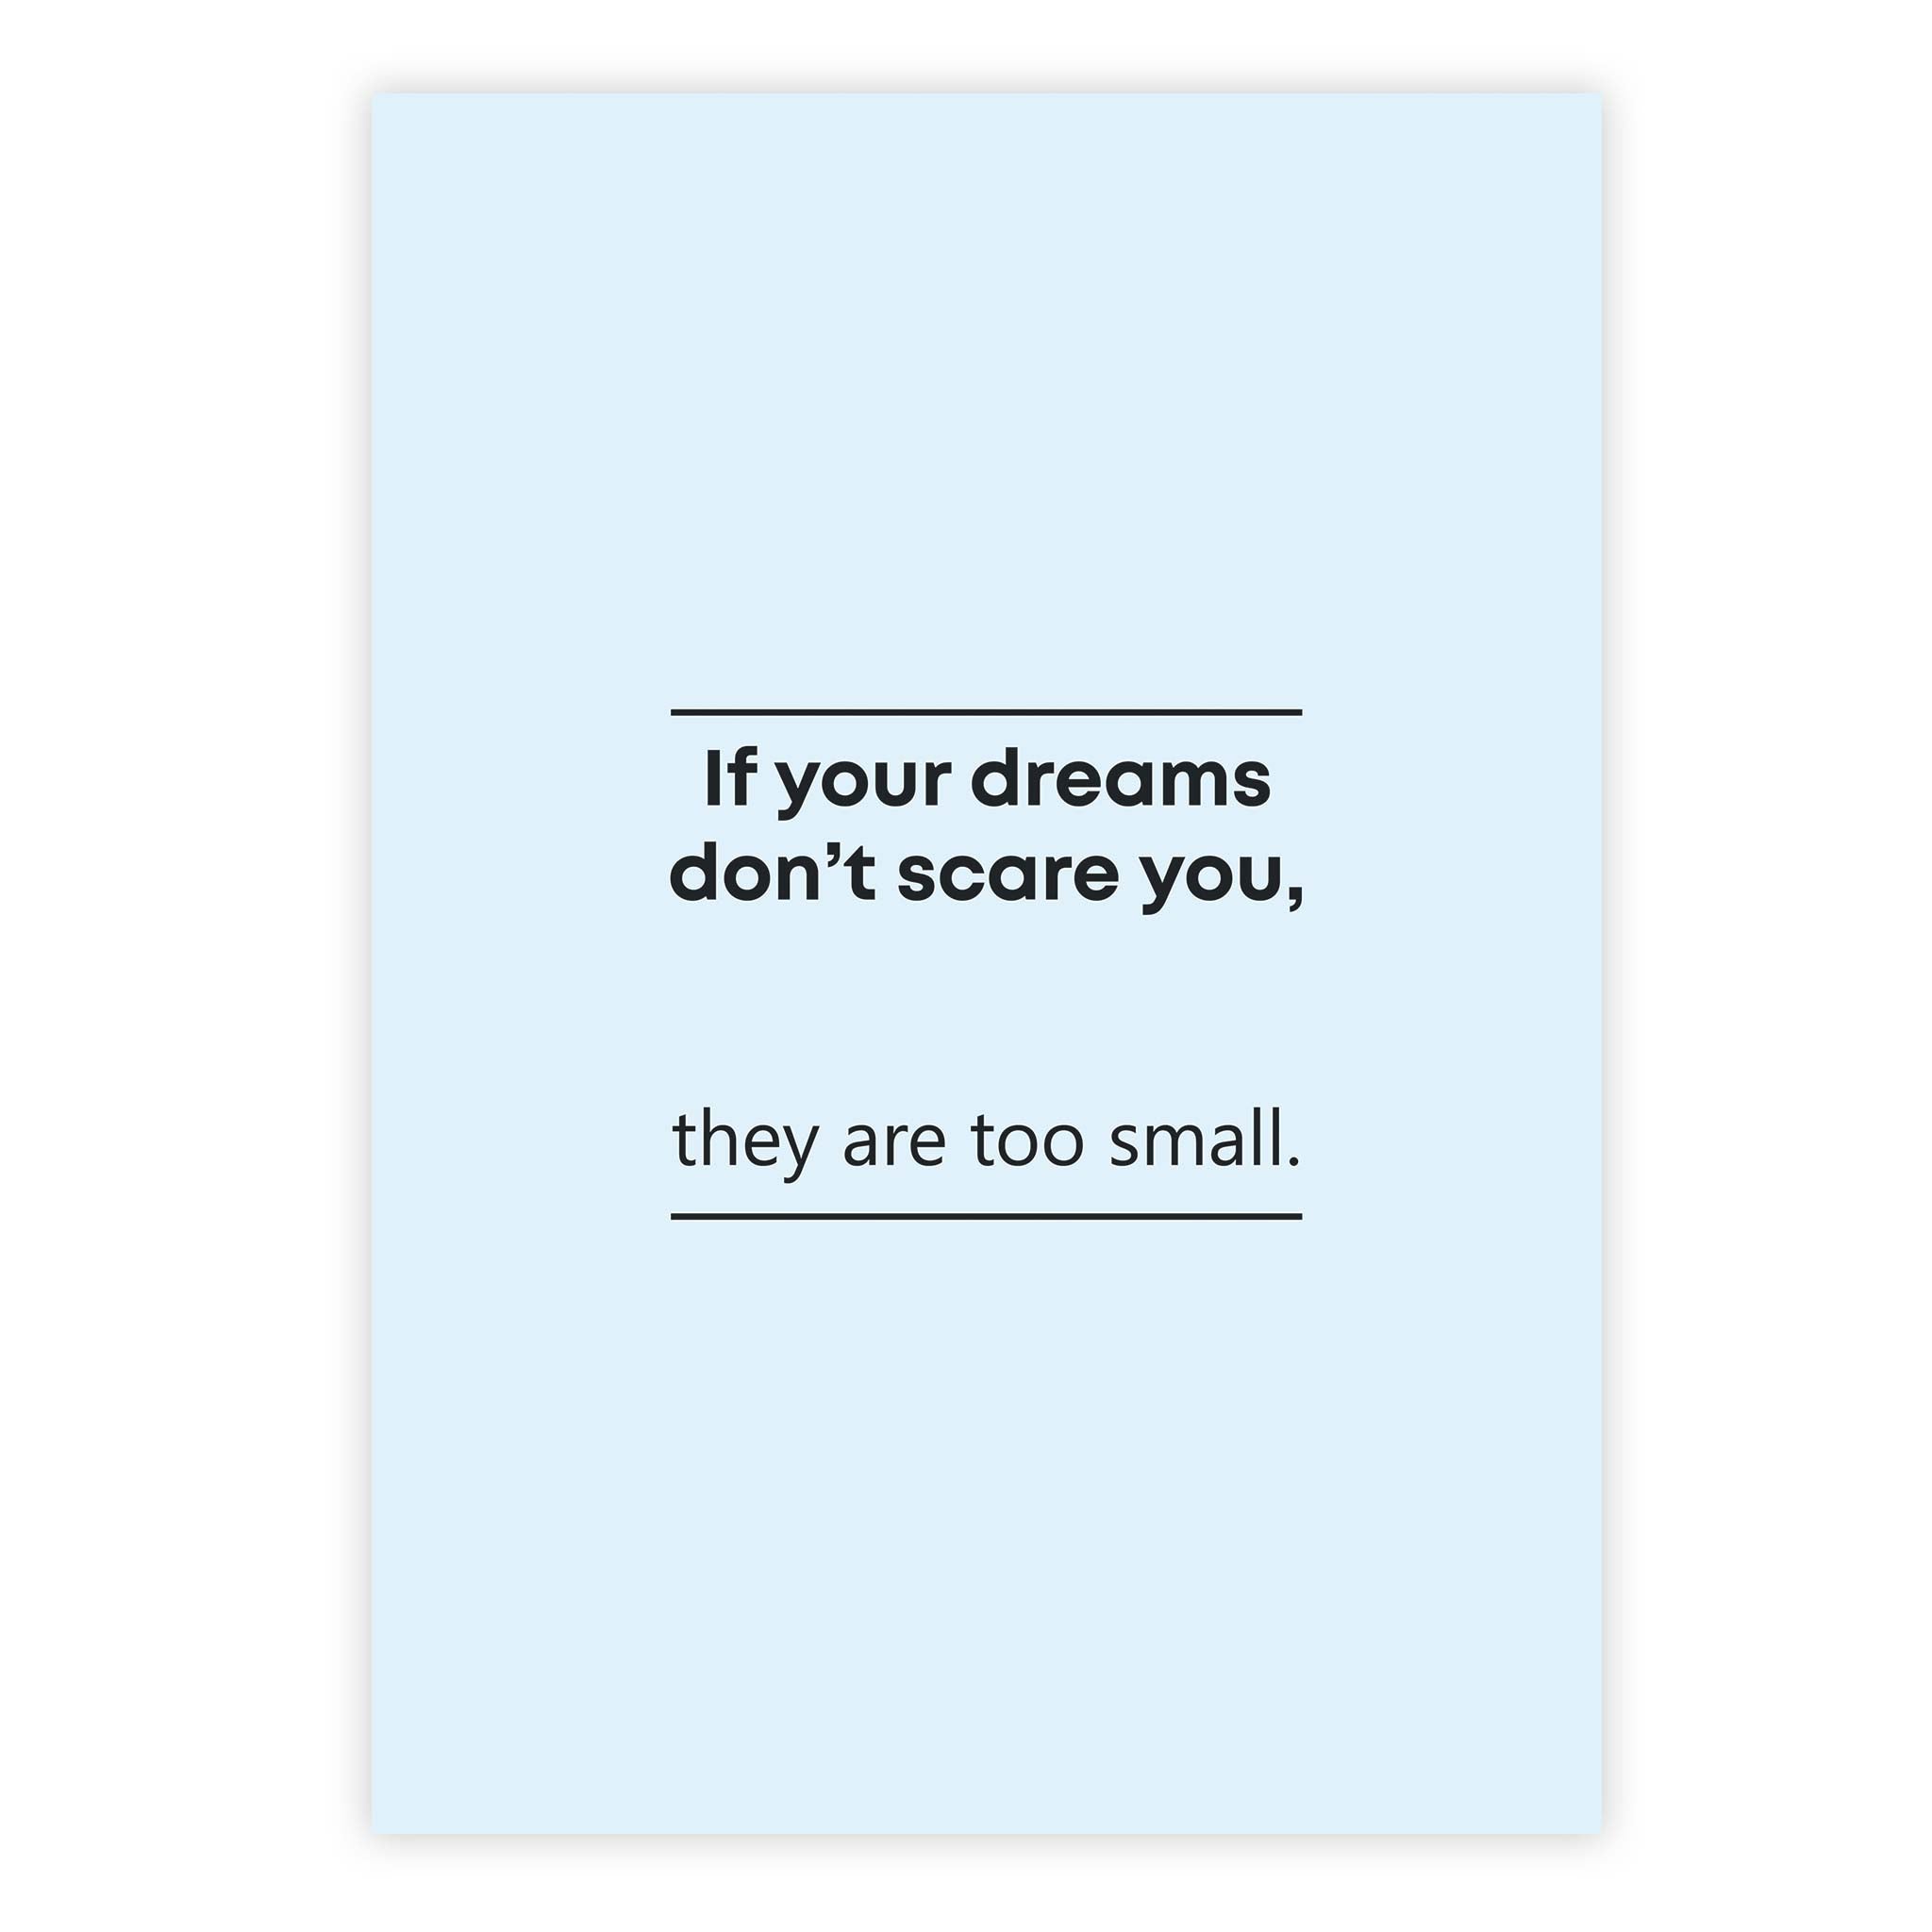 If your dreams don’t scare you, they are too small